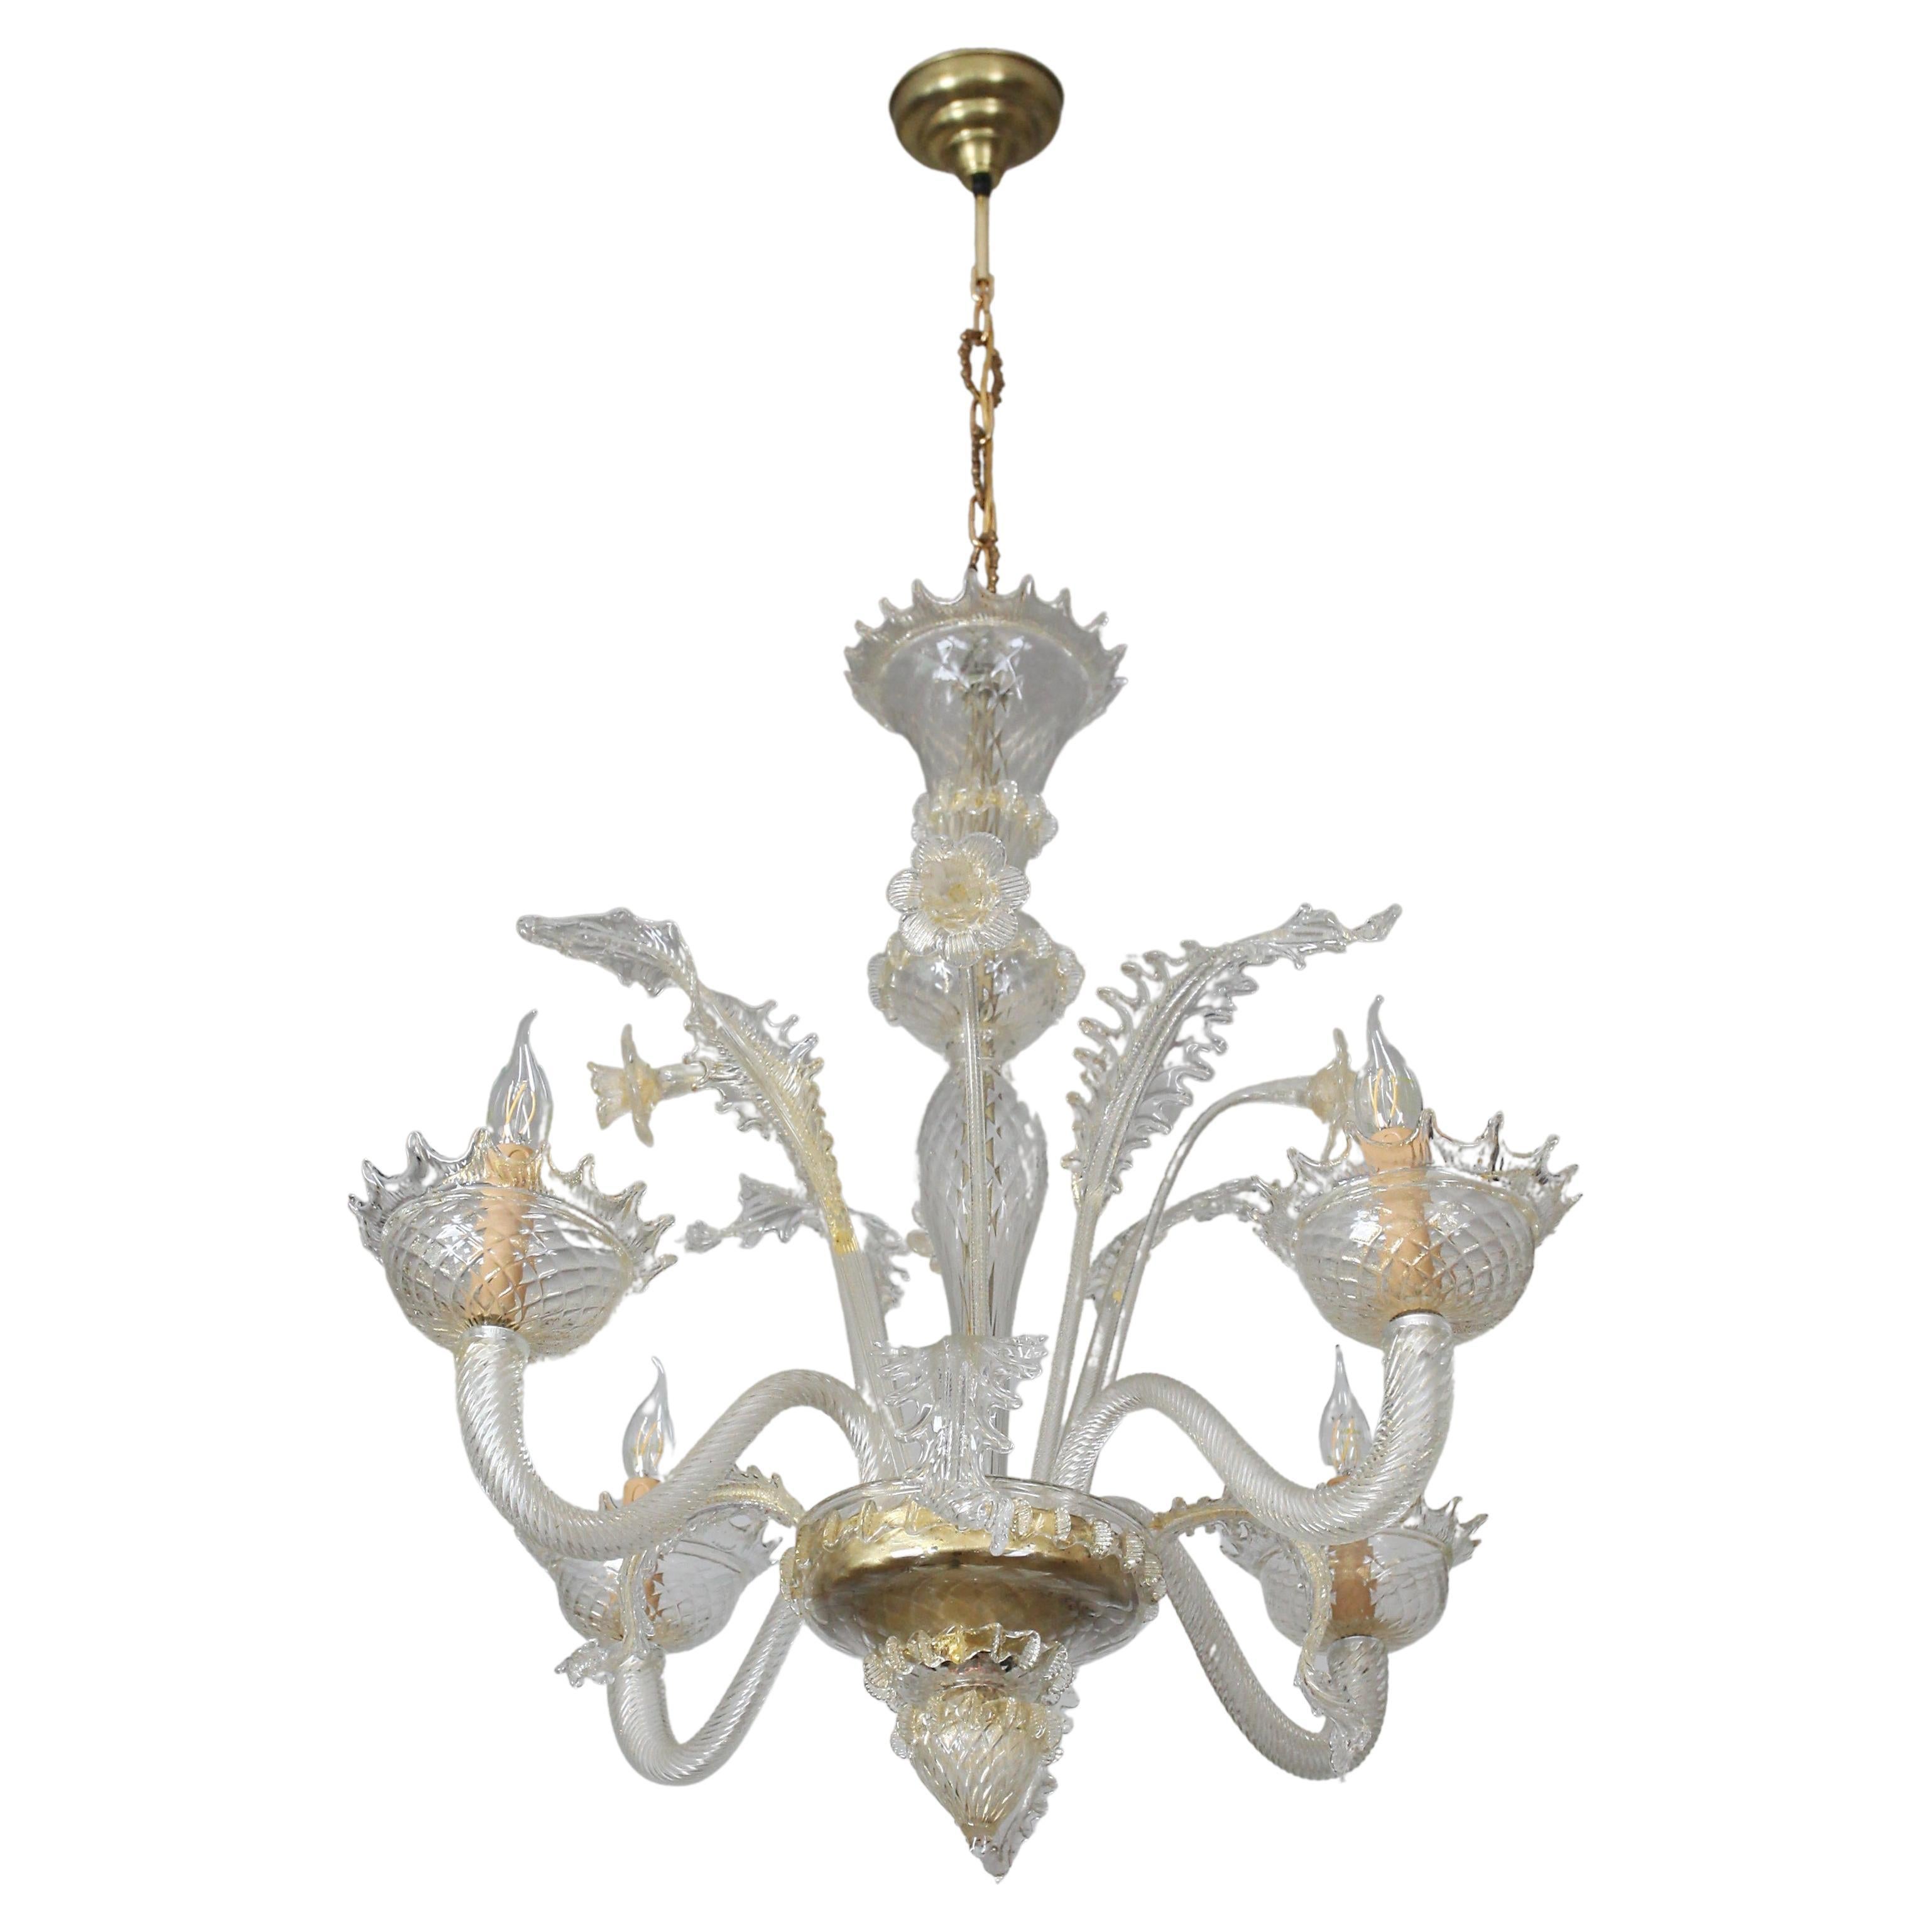 What are fancy chandeliers made of?